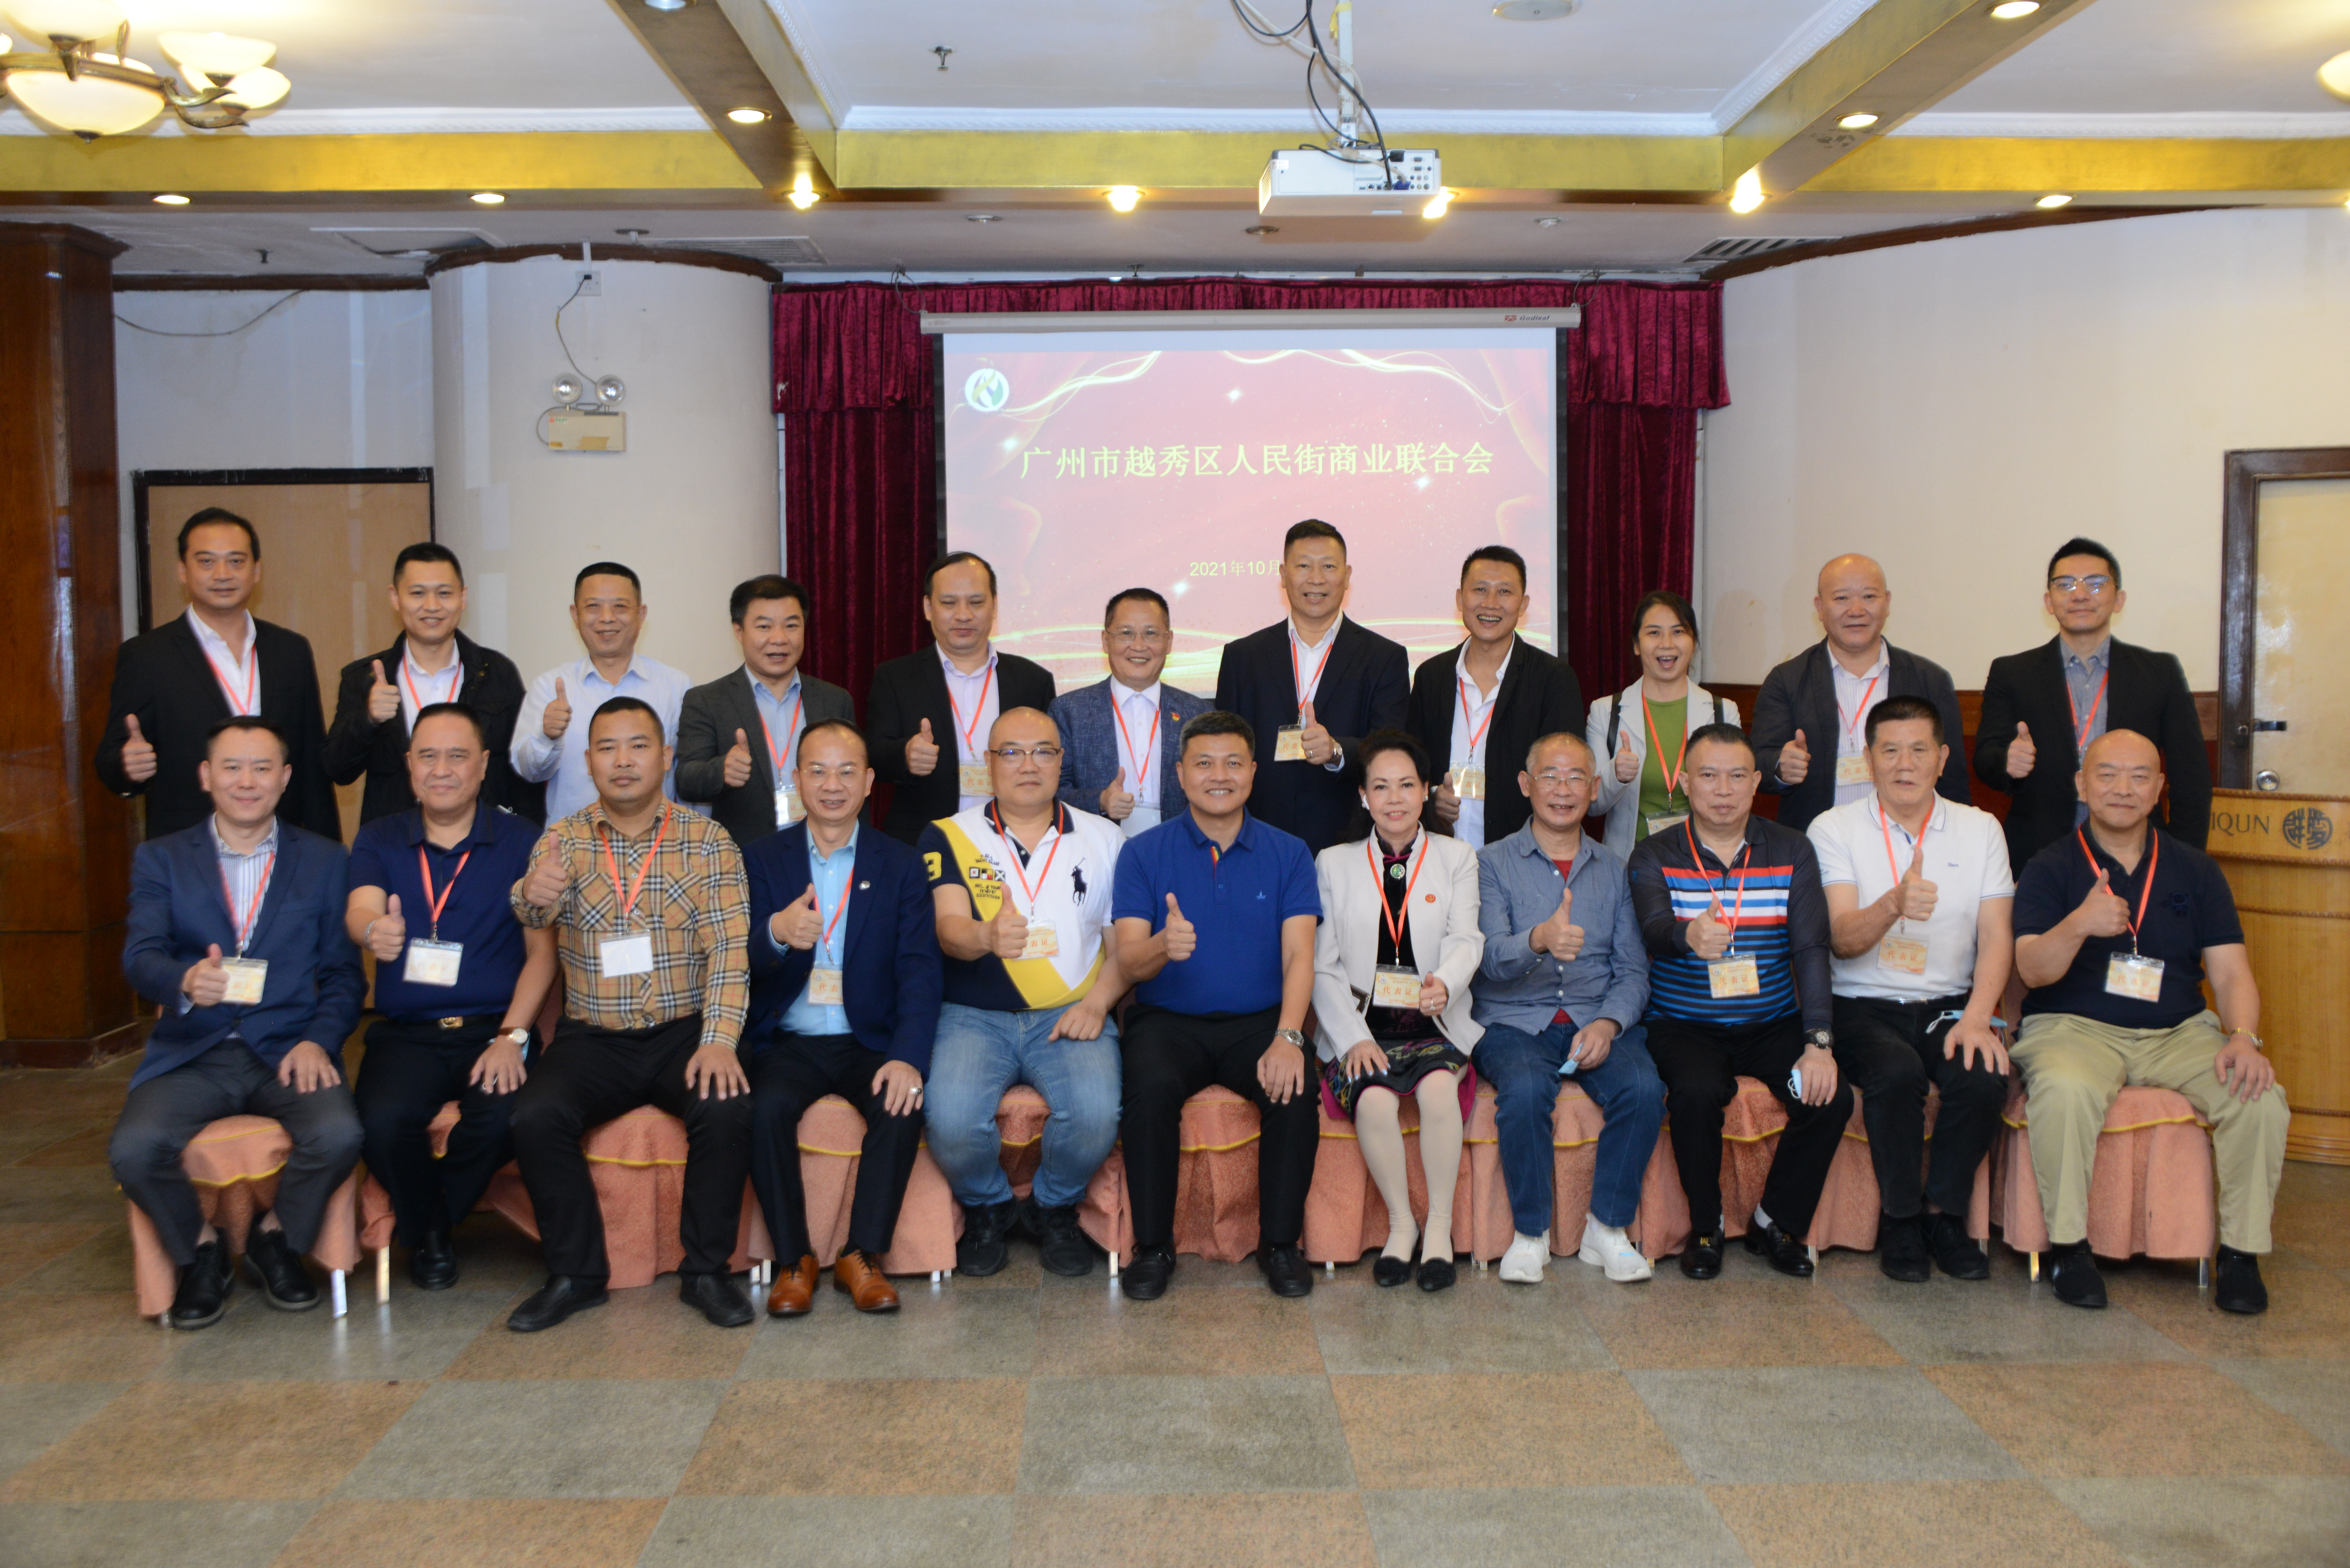 The third first member congress of Guangzhou Yuexiu District Renmin Street Business Federation was successfully held